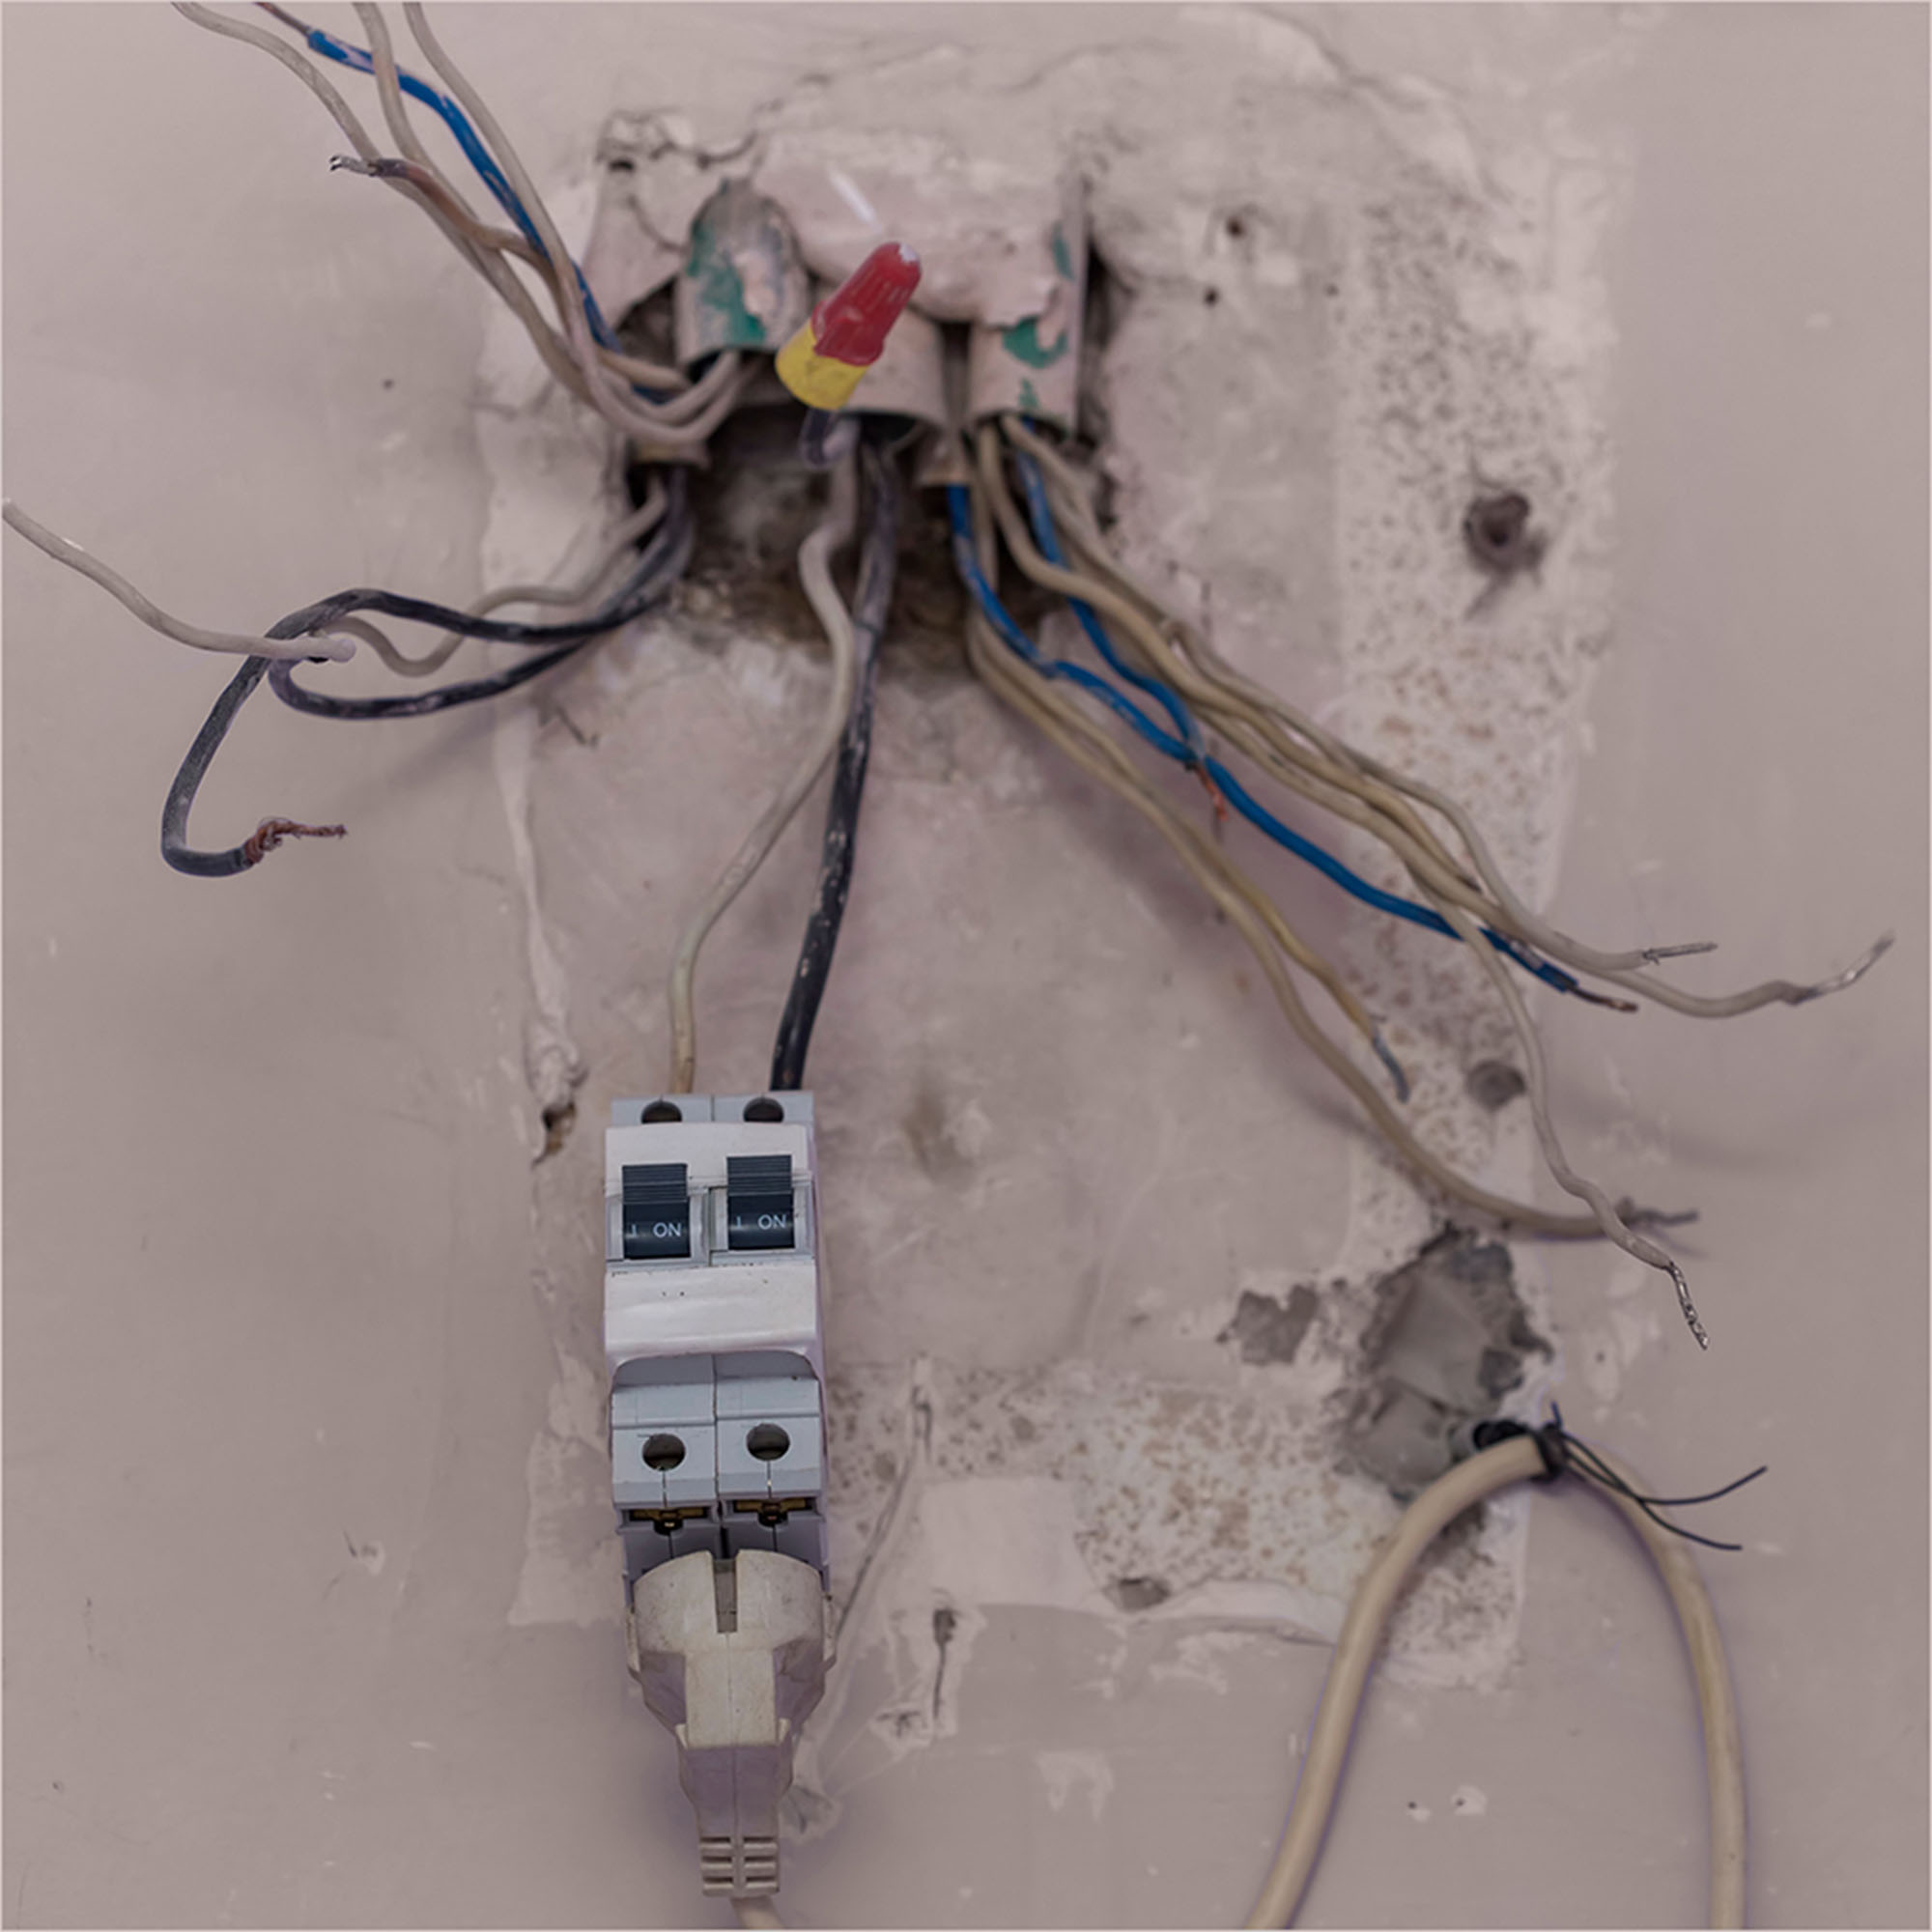 Old wiring hangs from a wall outlet.